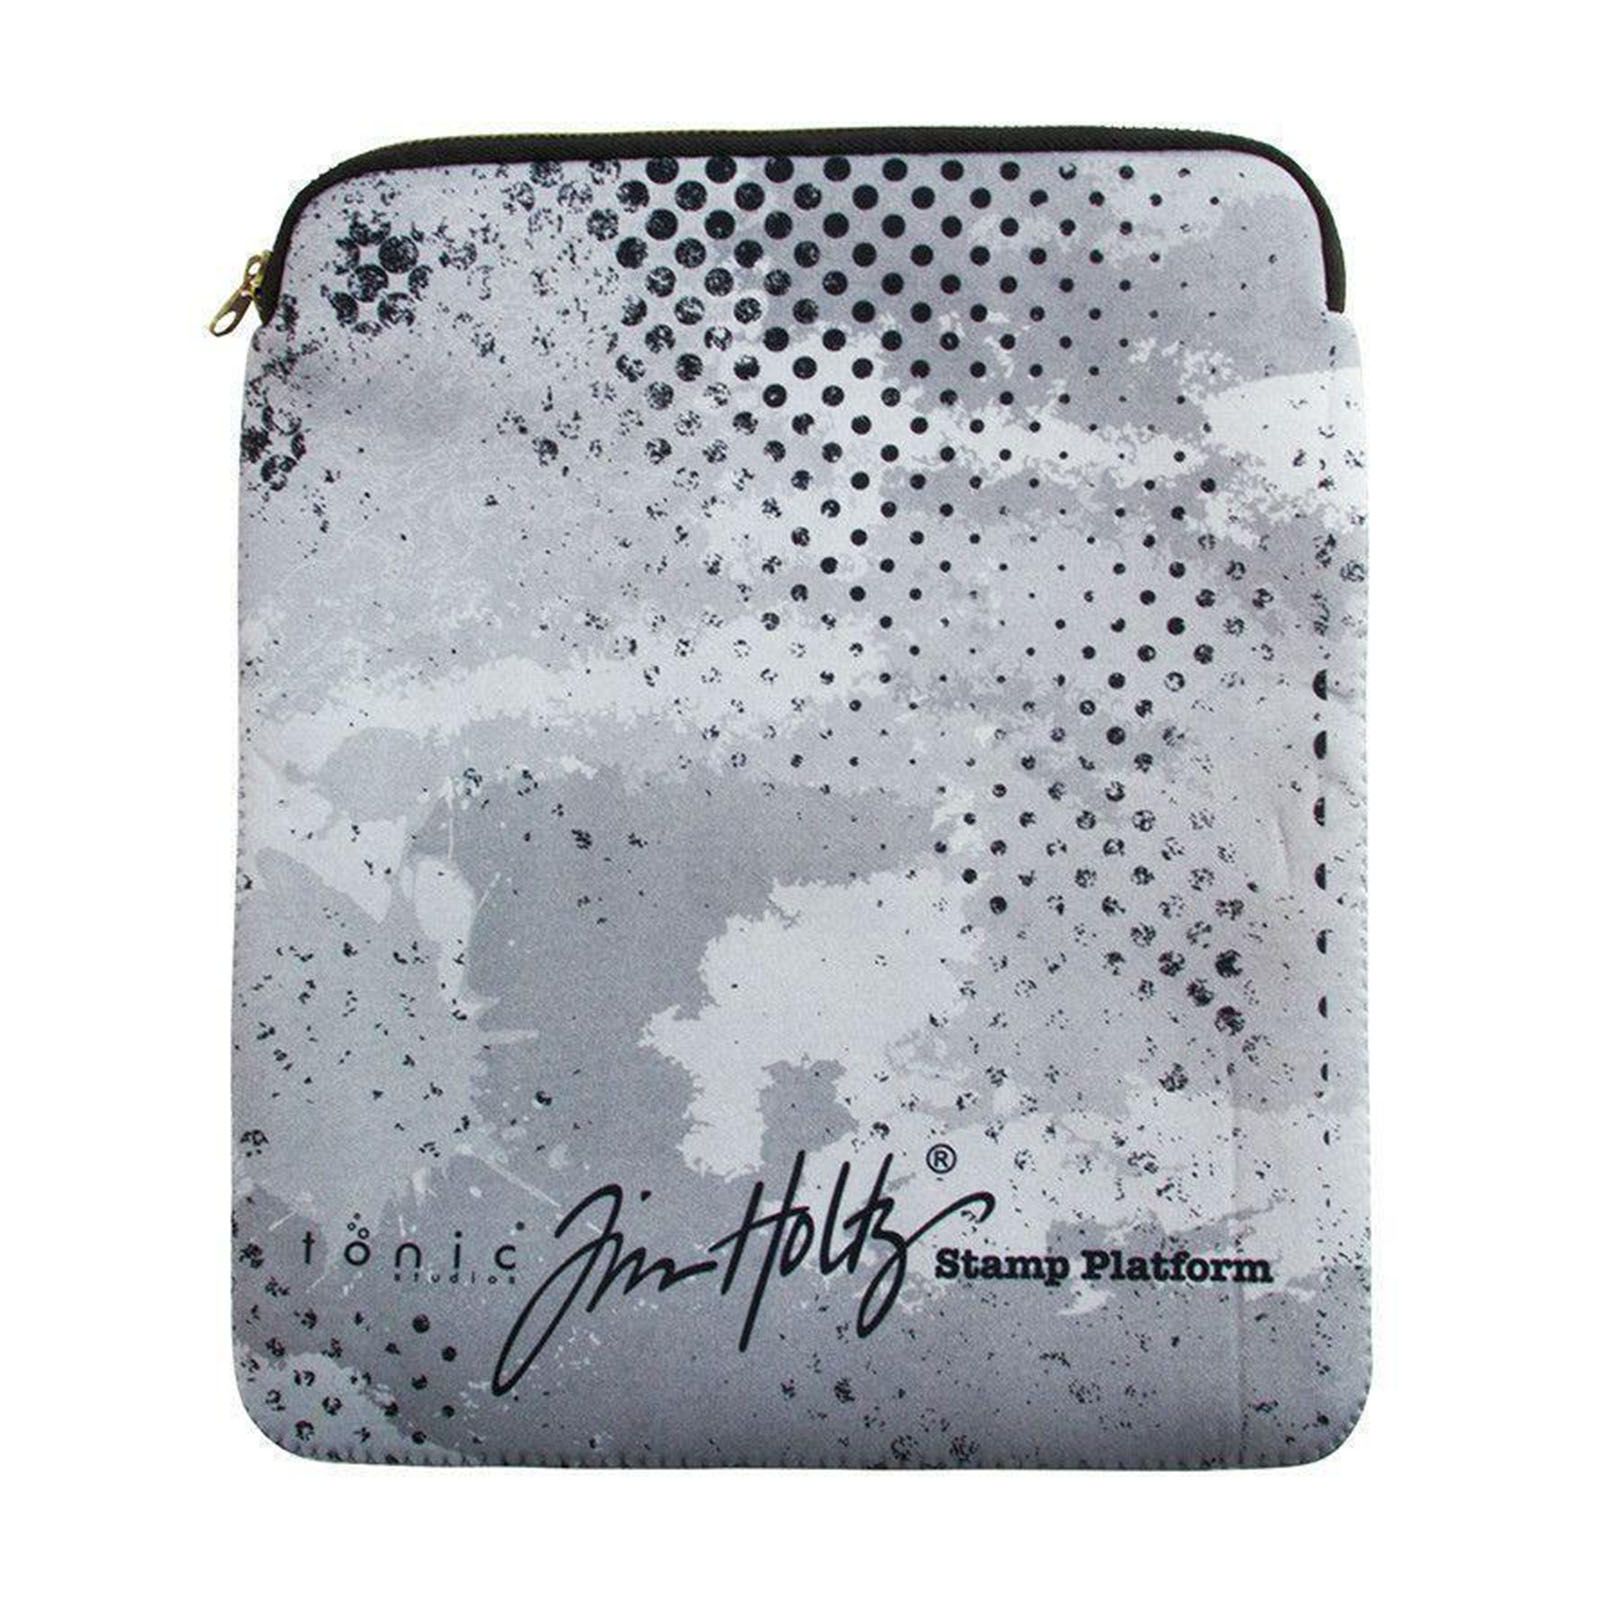 Tonic Studios • Protective Sleeve for the Tim Holtz Stamping Platform